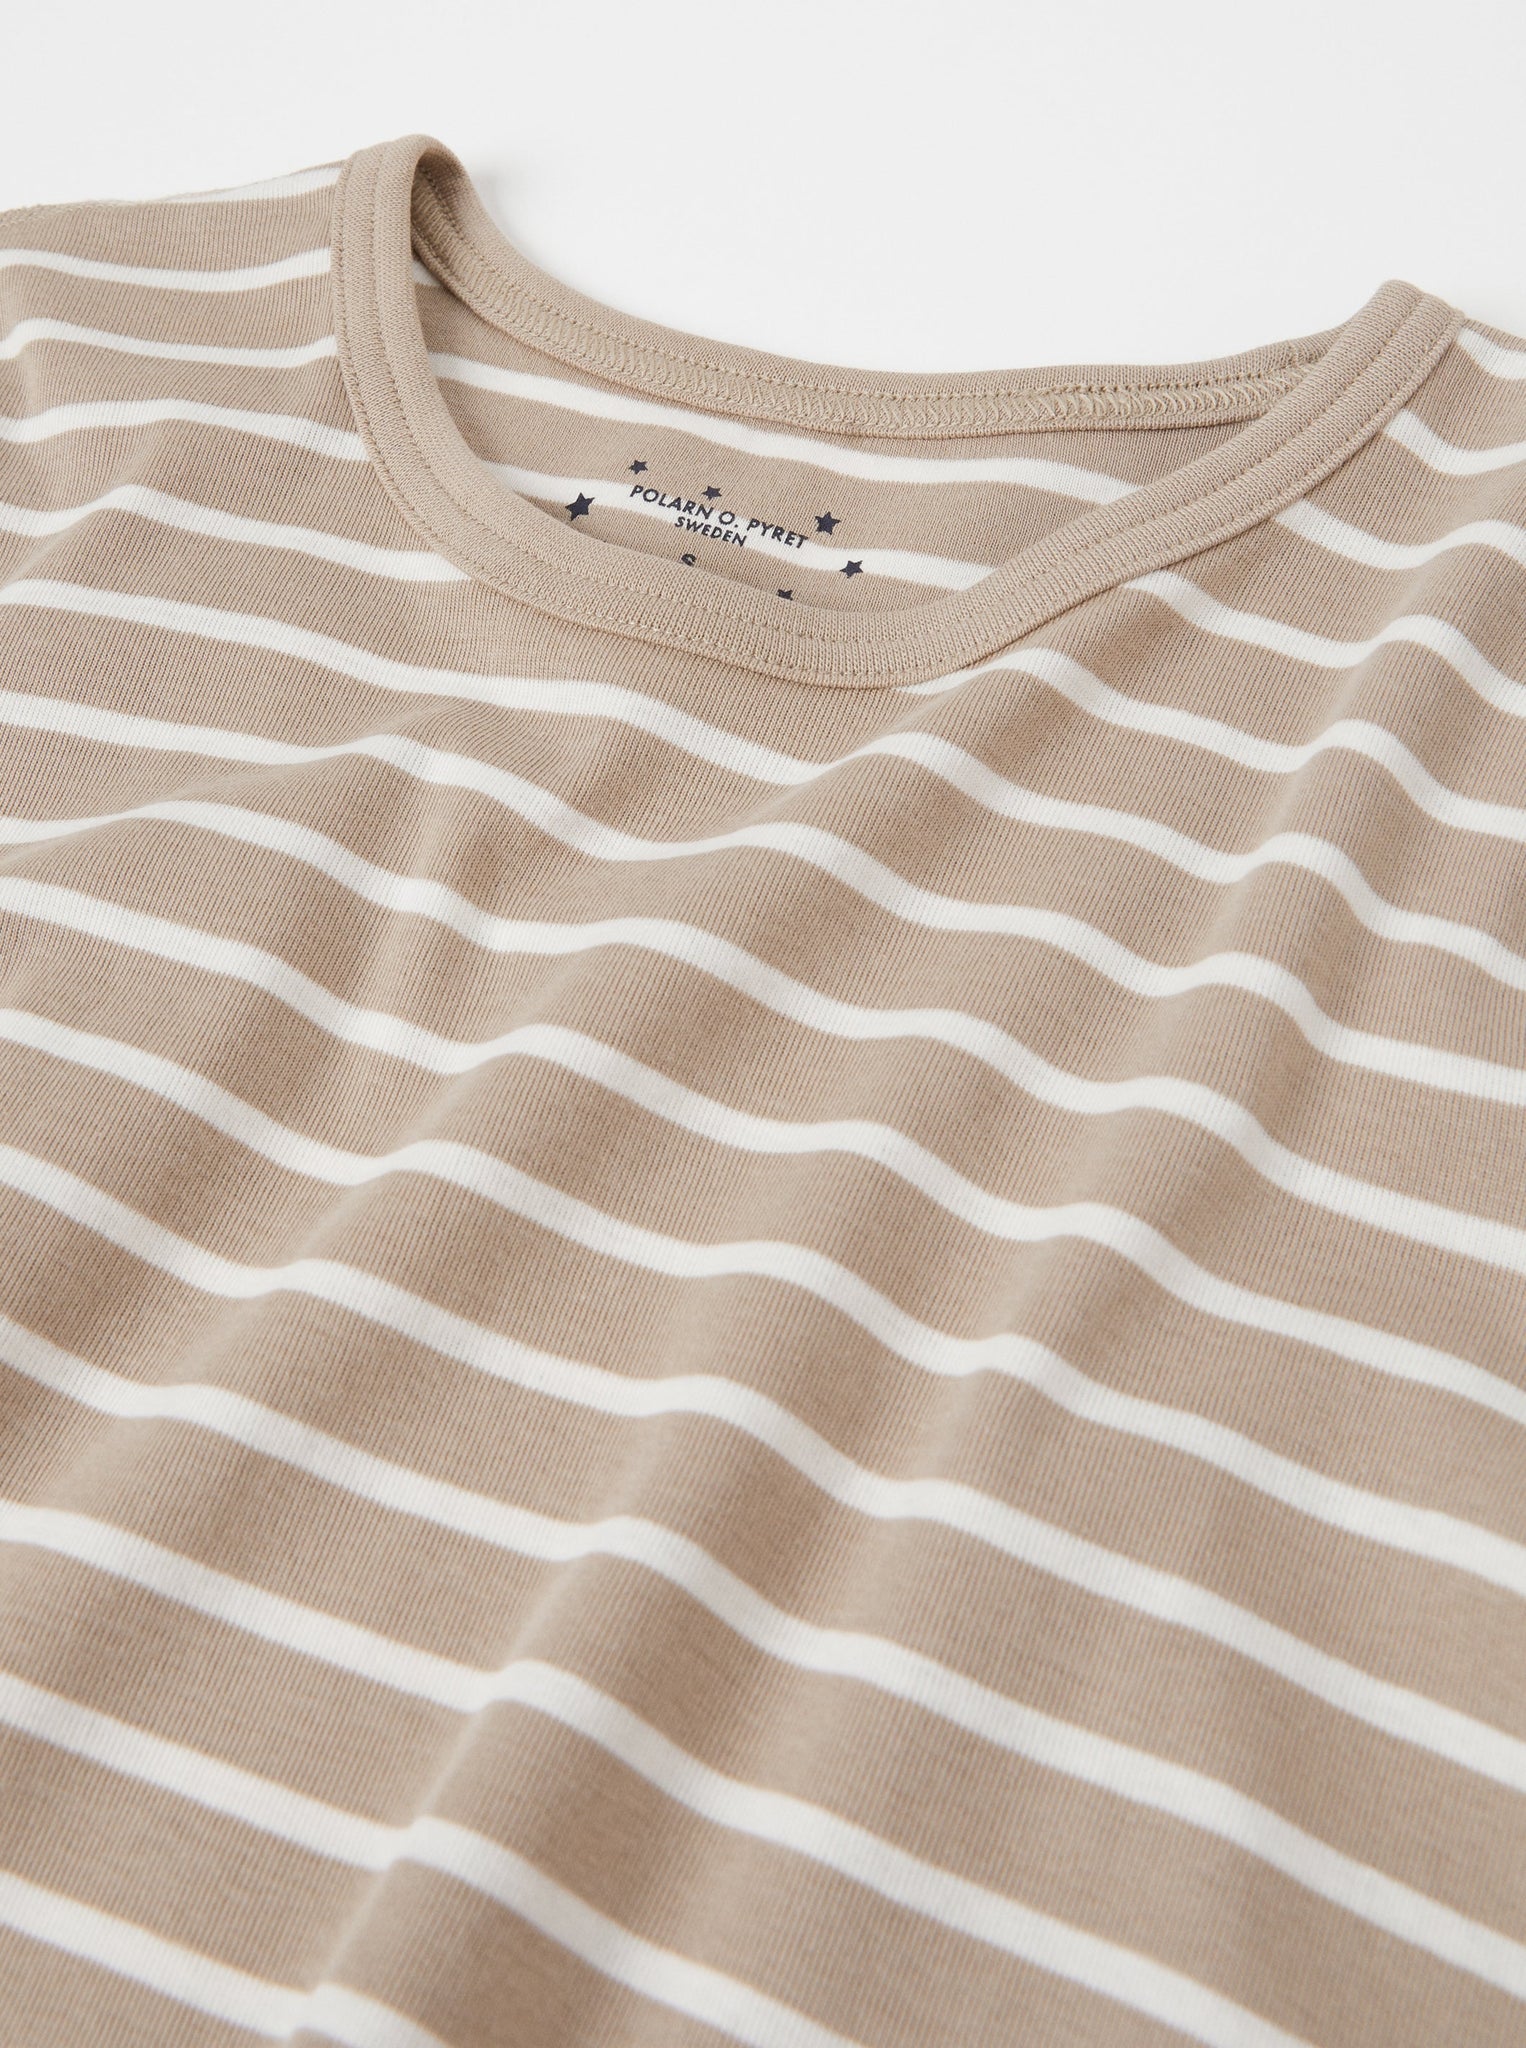 Organic Cotton Beige Adult Nightdress from the Polarn O. Pyret adult collection. Ethically produced kids clothing.